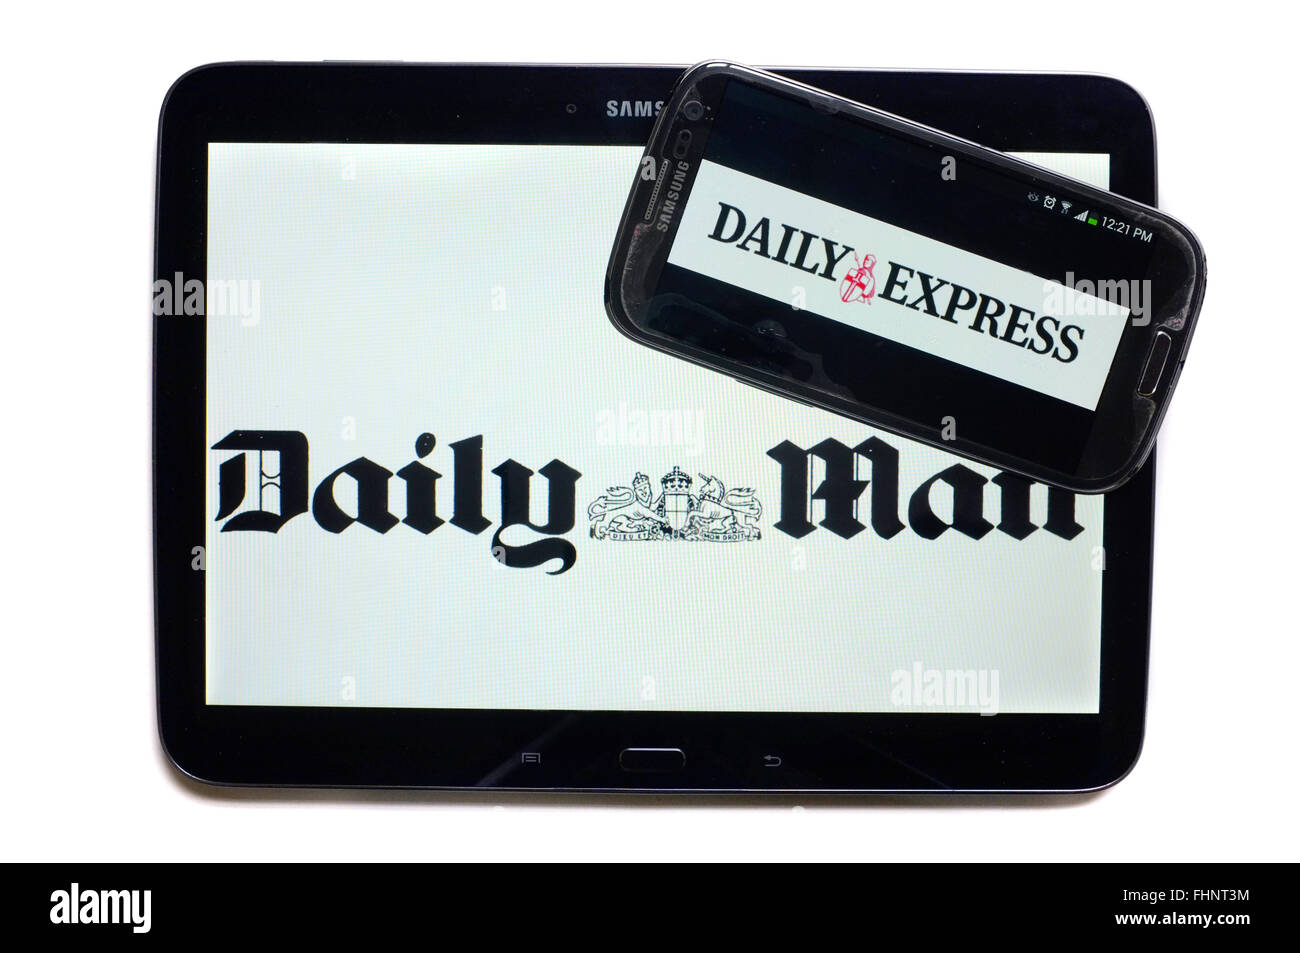 The logos of the Daily Mail and the Daily Express newspapers displayed on the screens of a tablet and a smartphone. Stock Photo